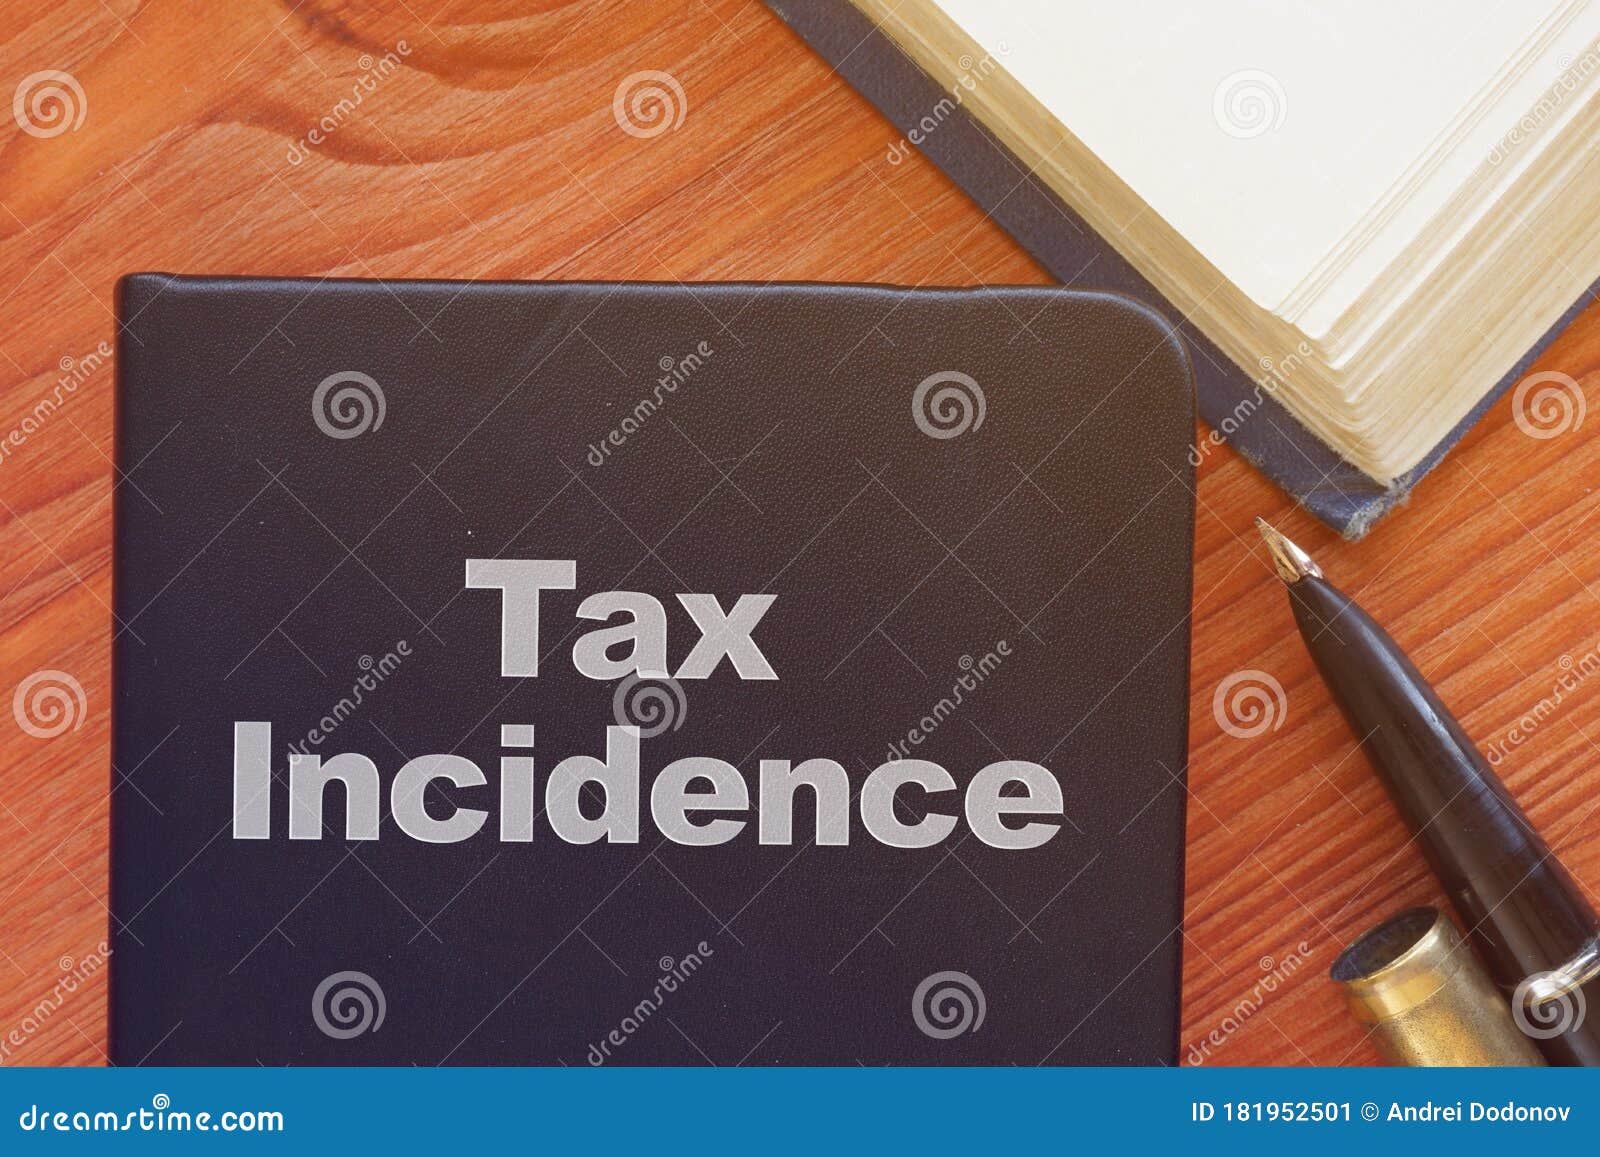 tax incidence is shown on the conceptual business photo